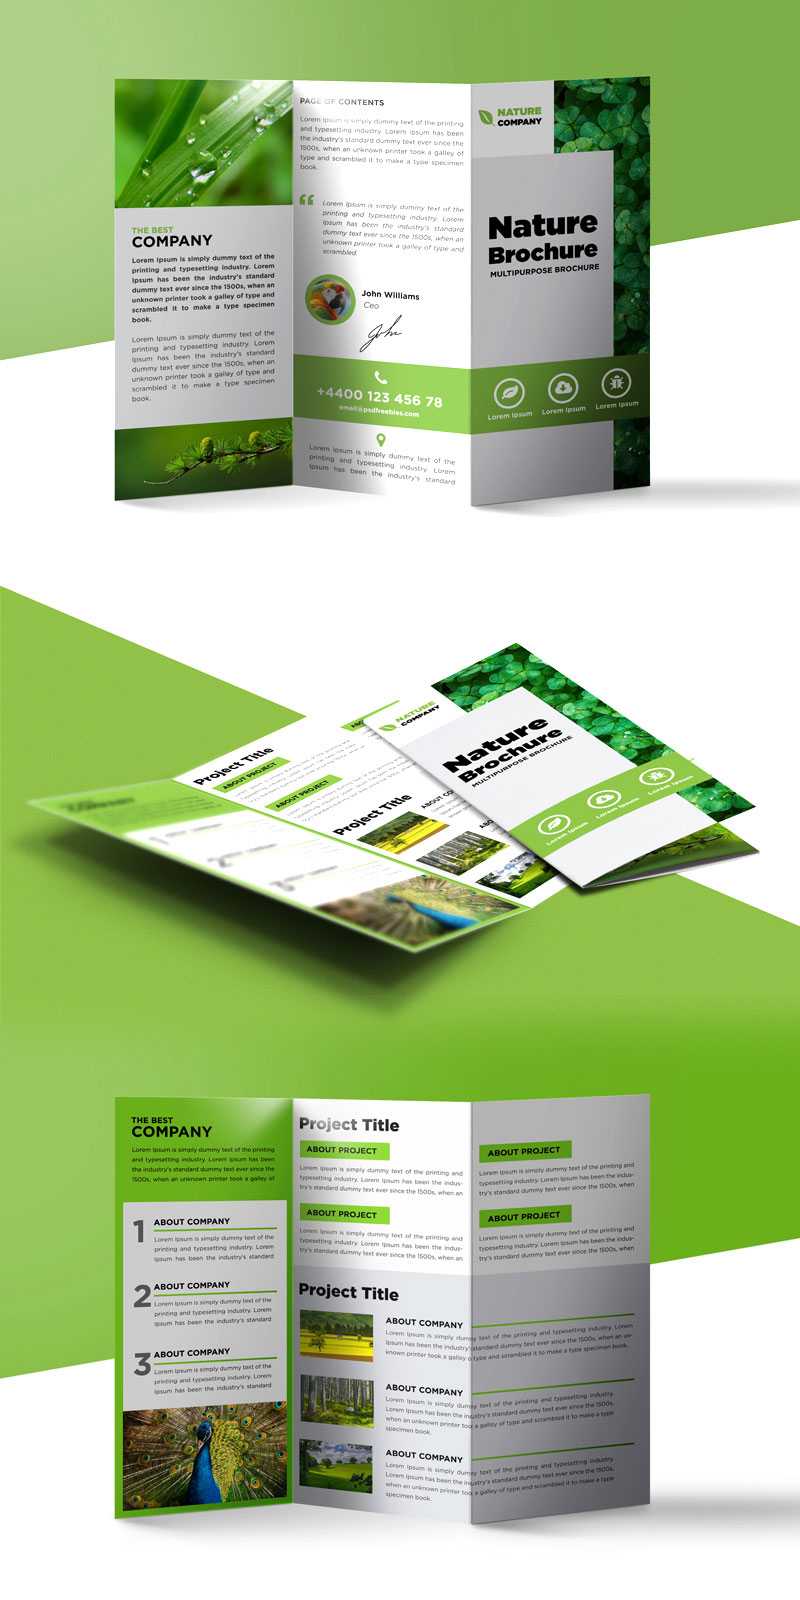 Nature Tri Fold Brochure Template Free Psd | Psdfreebies Intended For Free Three Fold Brochure Template